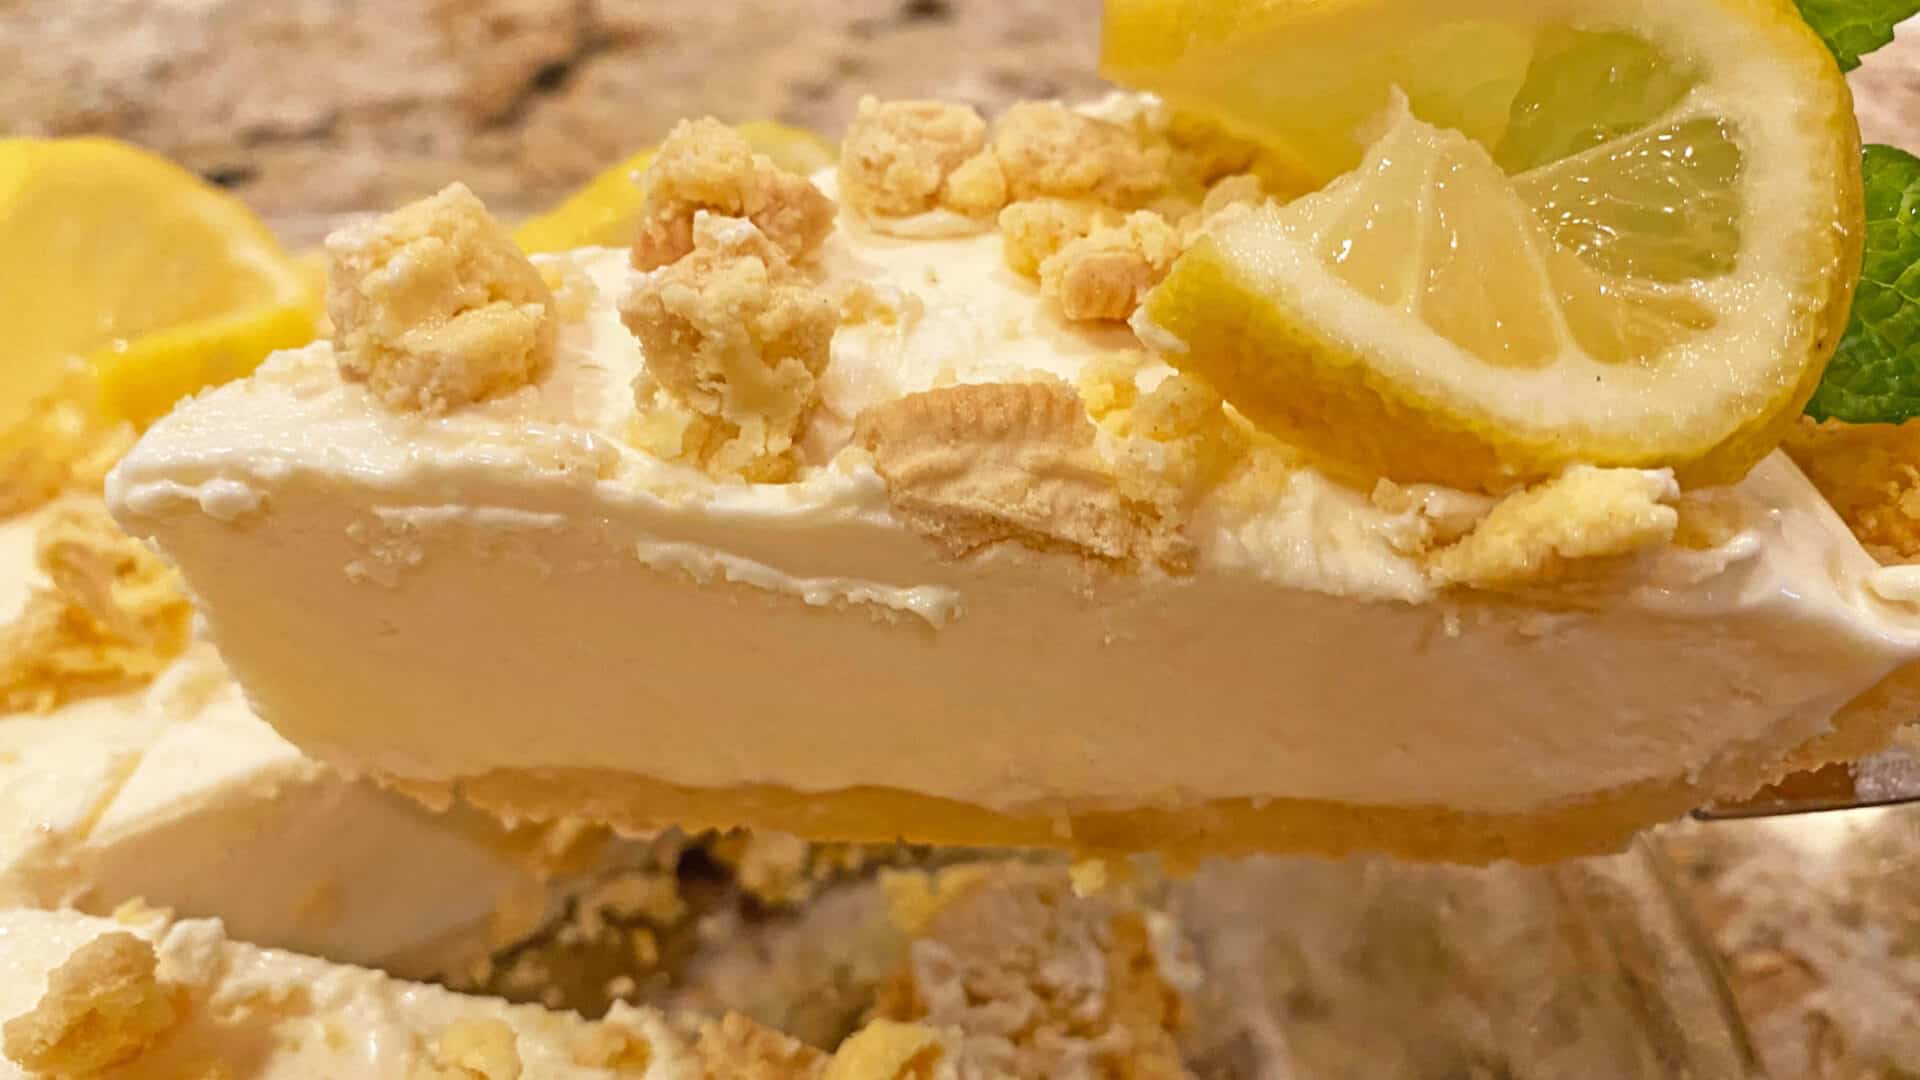 Creamy Lemon Pie with cookie crumb curst and toppings with a lemon twist